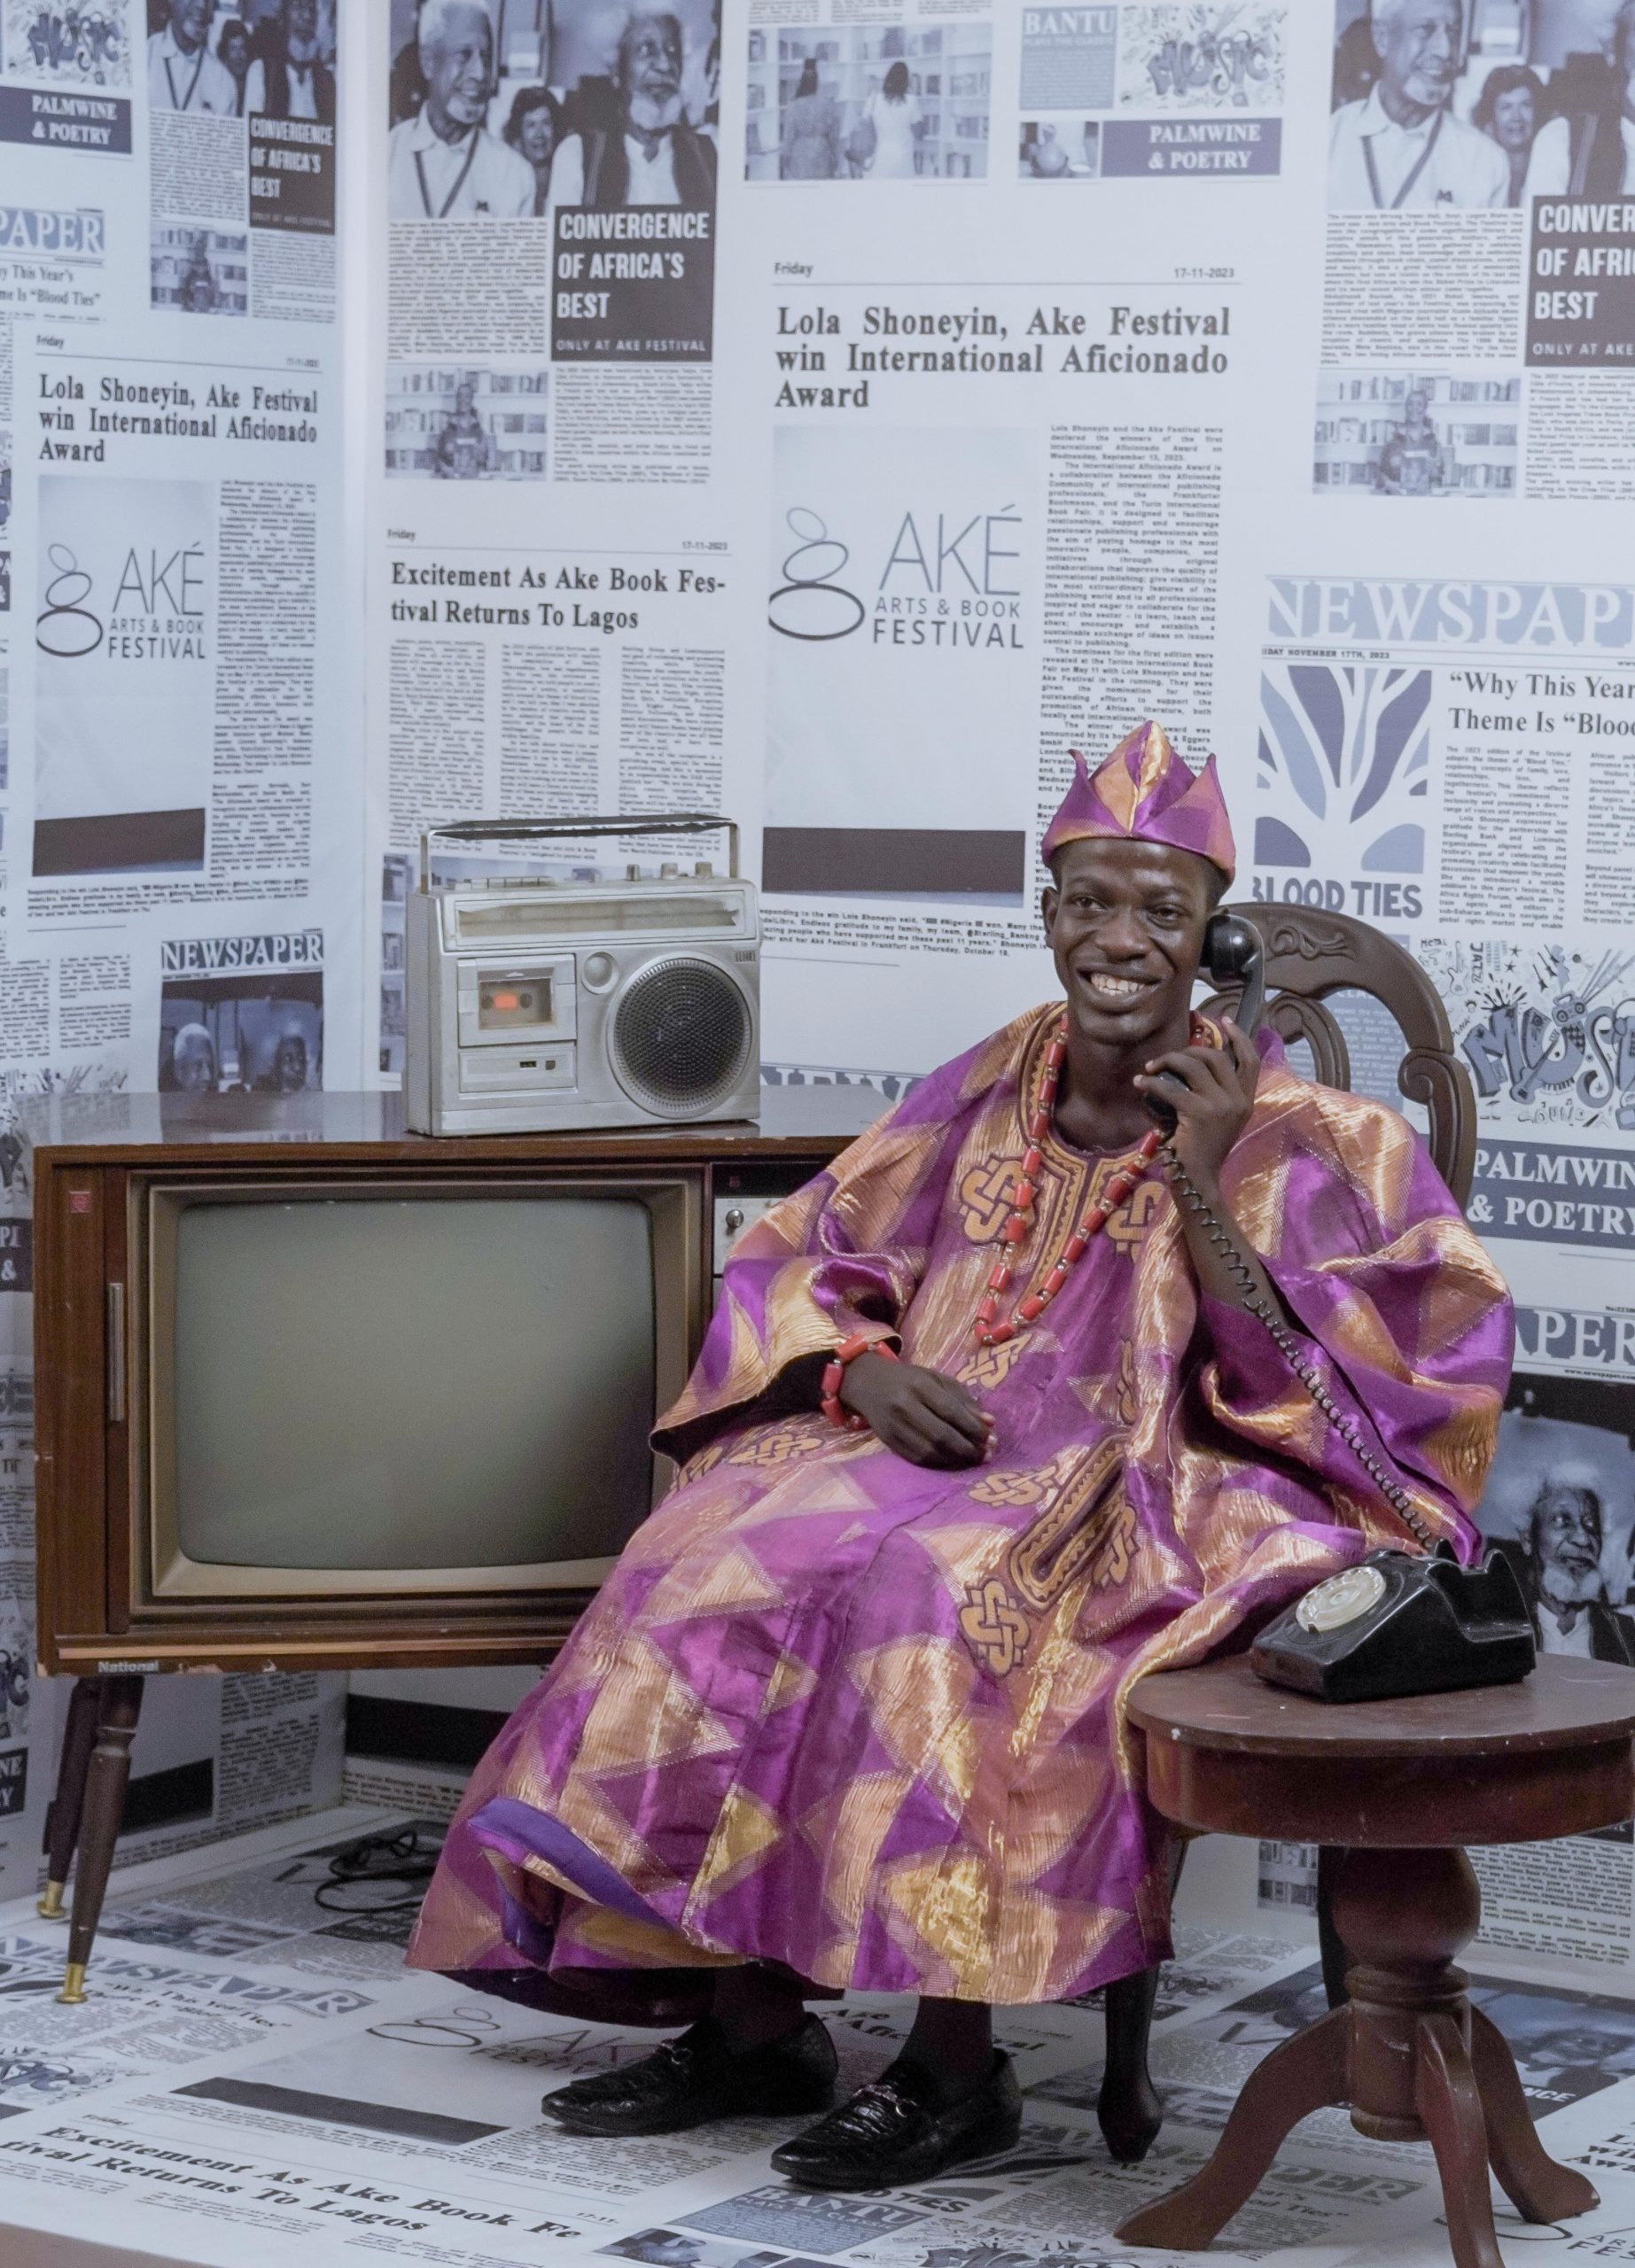 Aremo gemini sitting down beside a black and white old tv and putting an old land phone to his ears